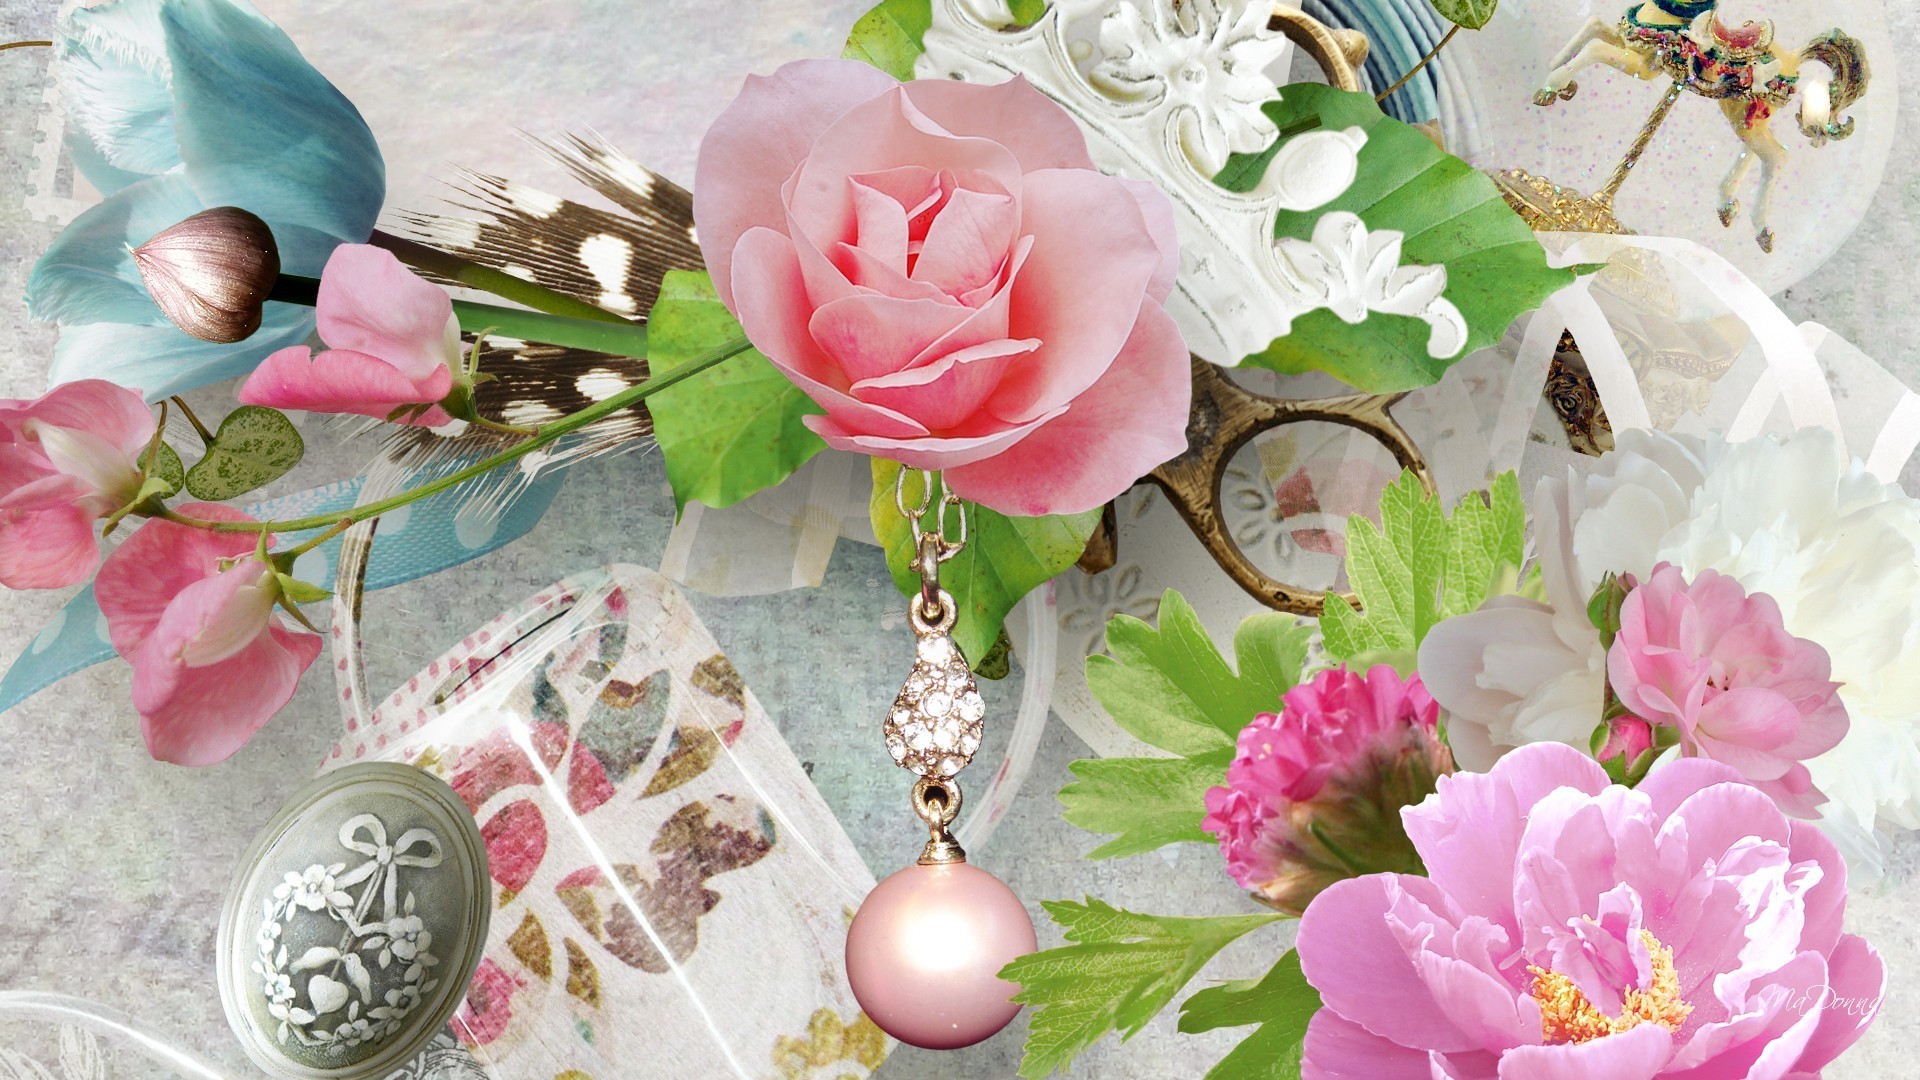 1920x1080 Peonies Tag - Bit Romantic Brooch Peonies Chain Just Flowers Feather Pearls  Vintage Roses Daisy Flower